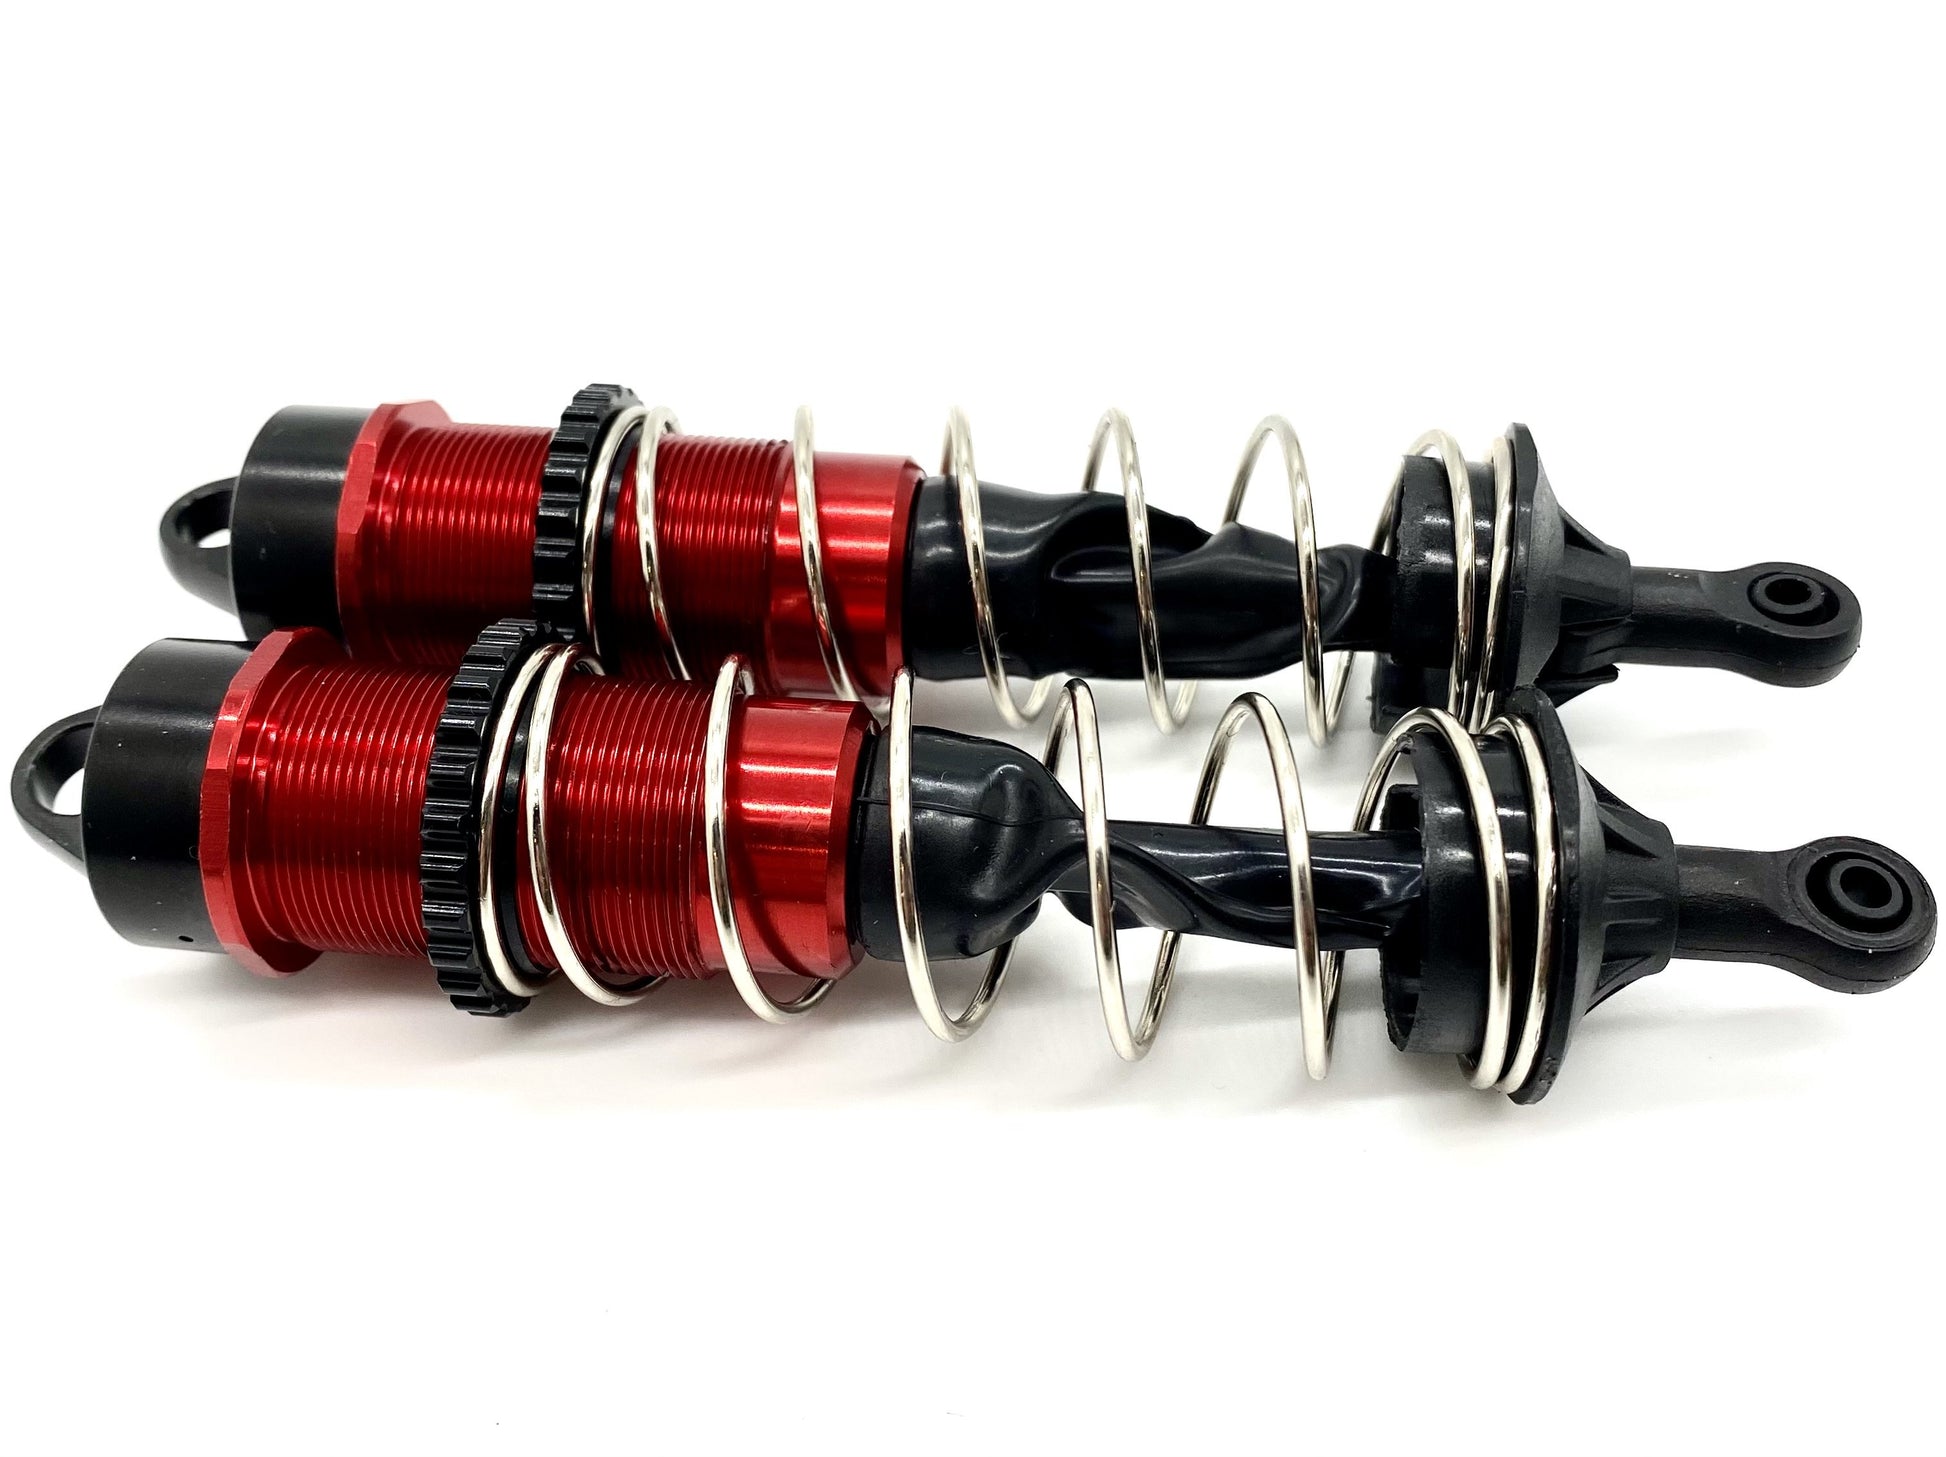 Arrma TYPHON 6s V5 BLX - Rear Shocks Assembled Dampers & Springs ARA8606V5 - Dirt Cheap RC SAVING YOU MONEY, ONE PART AT A TIME